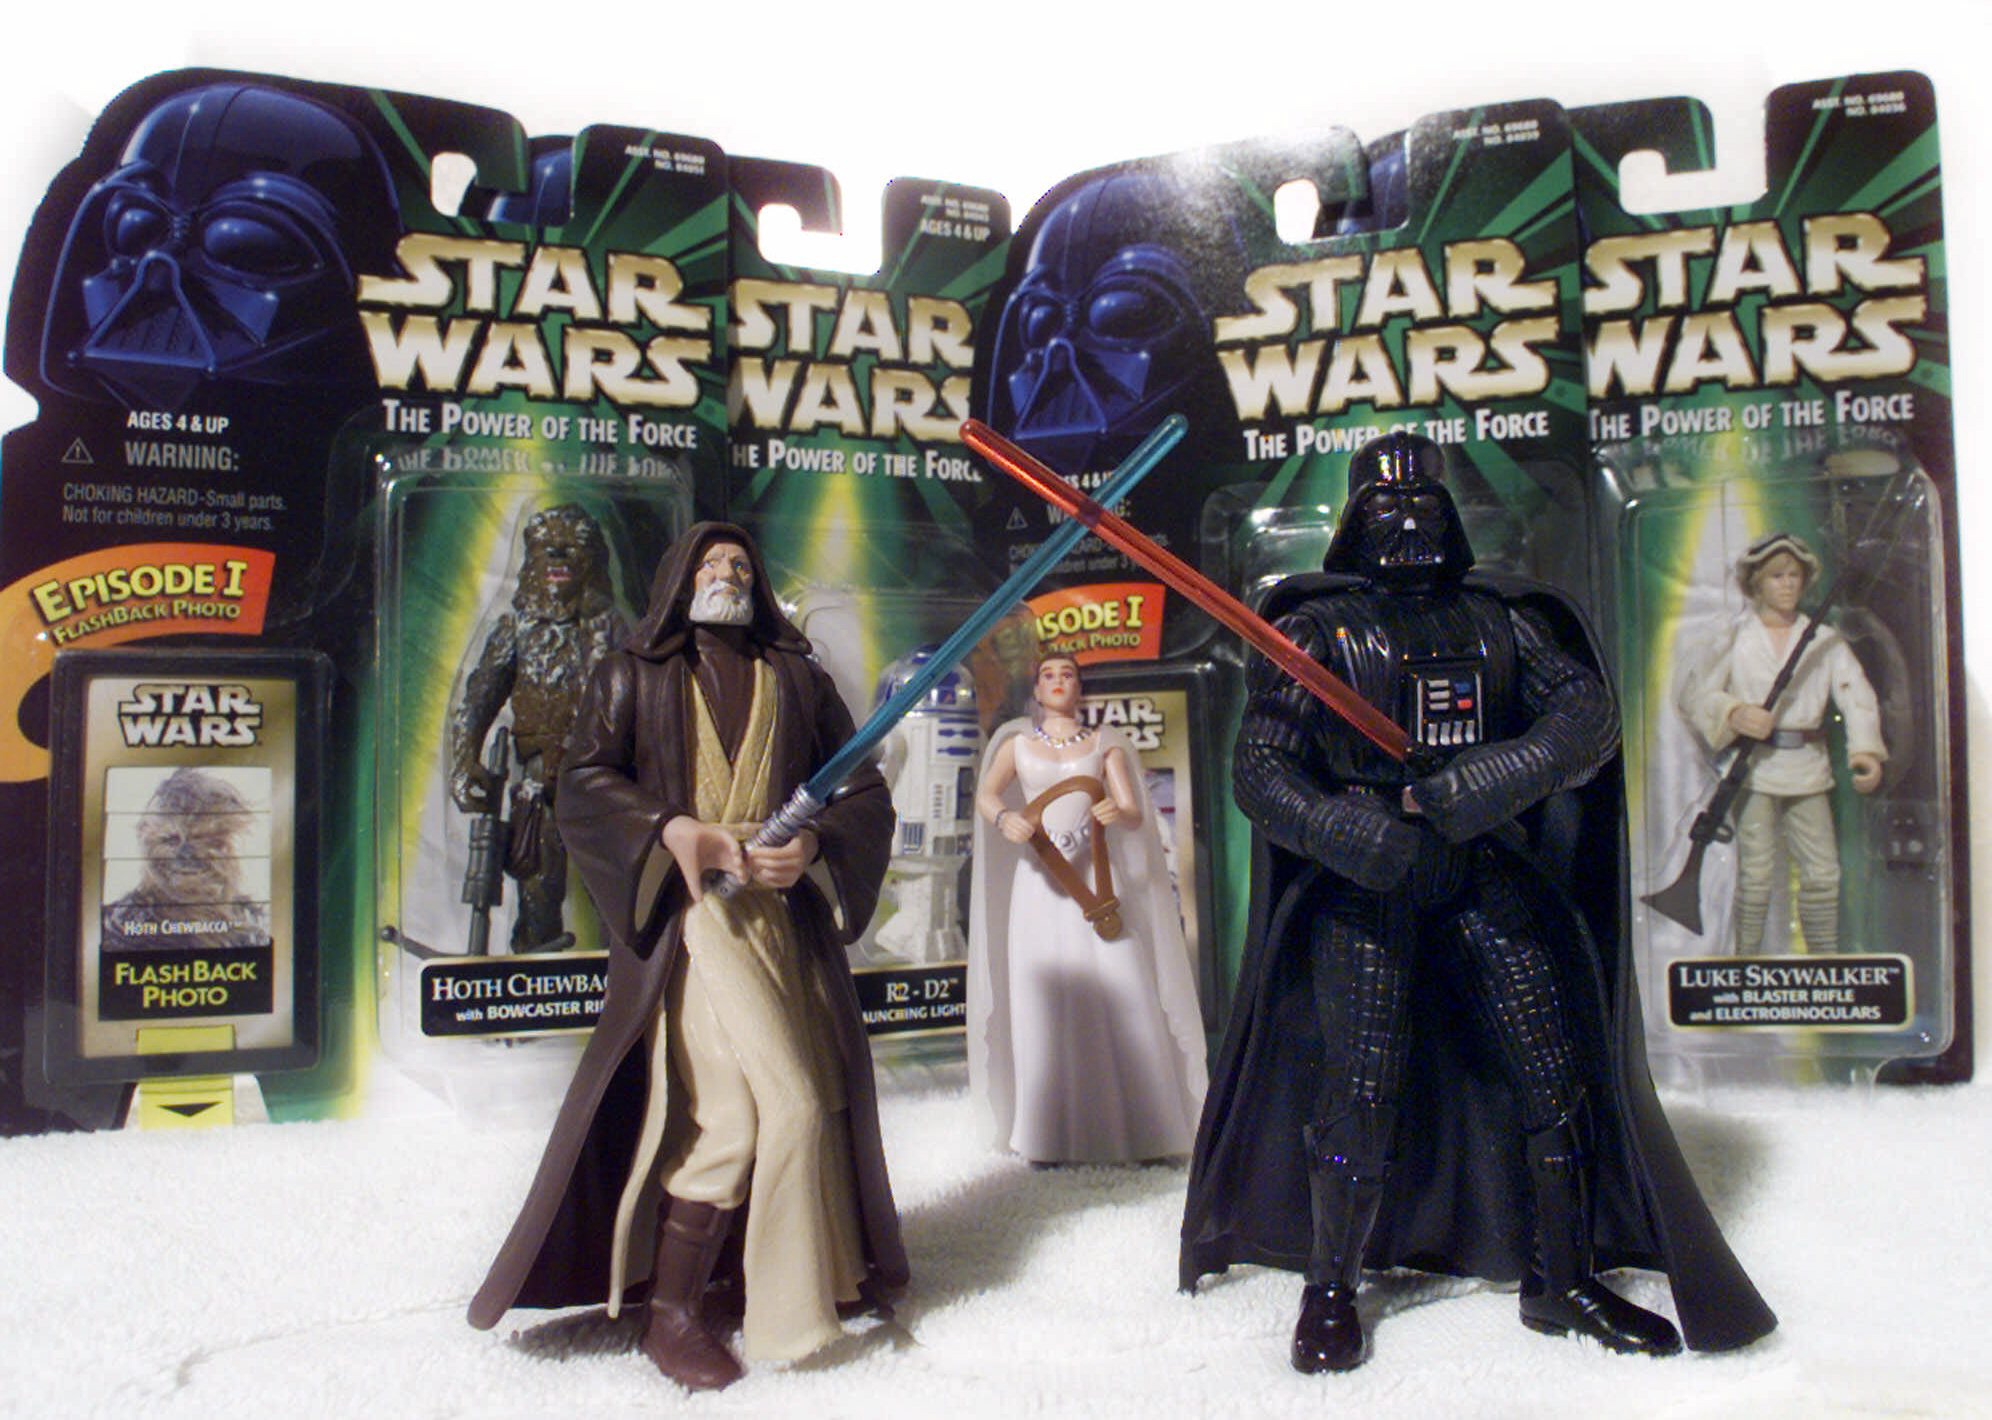 &quot;Star Wars&quot; action figures Darth Vader, right, and Ben (Obi-Wan) Kenobi, left, are displayed in 1999, with Princess Leia Organa in her ceremonial dress, in front of other packaged characters from the film series.